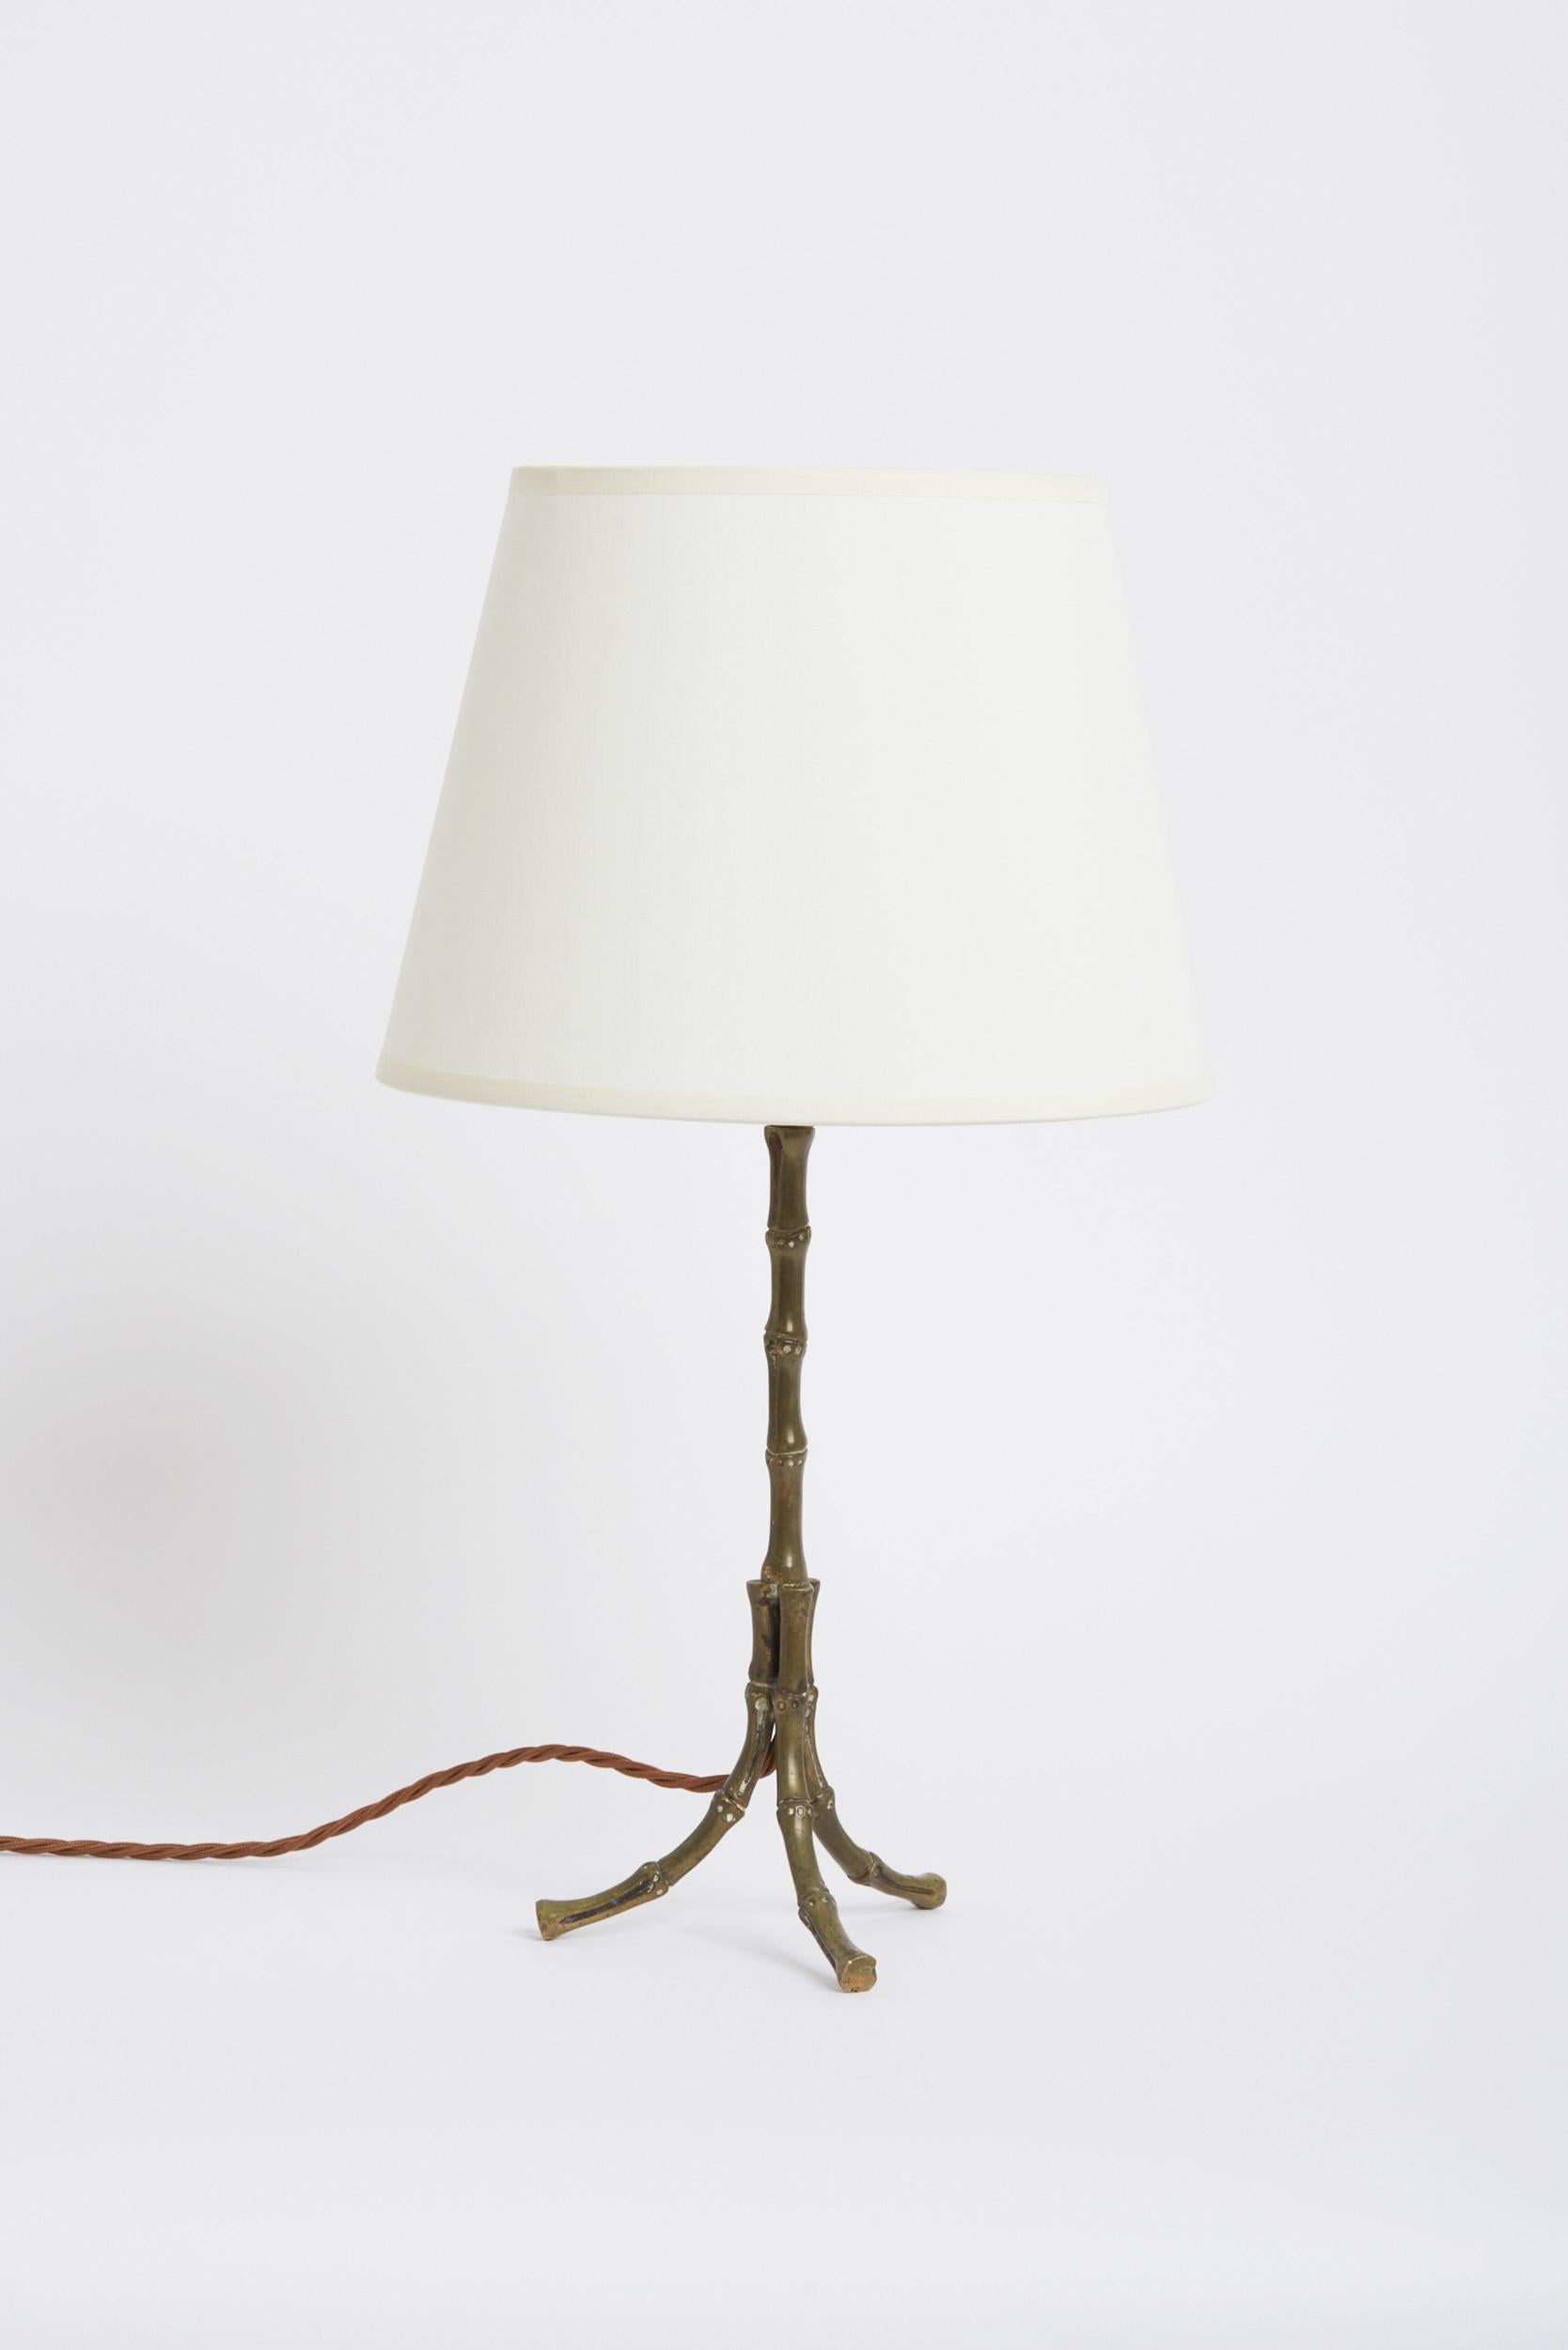 A brass bamboo table lamp.
France, Circa 1970.
With the shade: 46 cm high by 25 cm diameter.
Lamp base only: 31 cm high by 14 cm diameter.